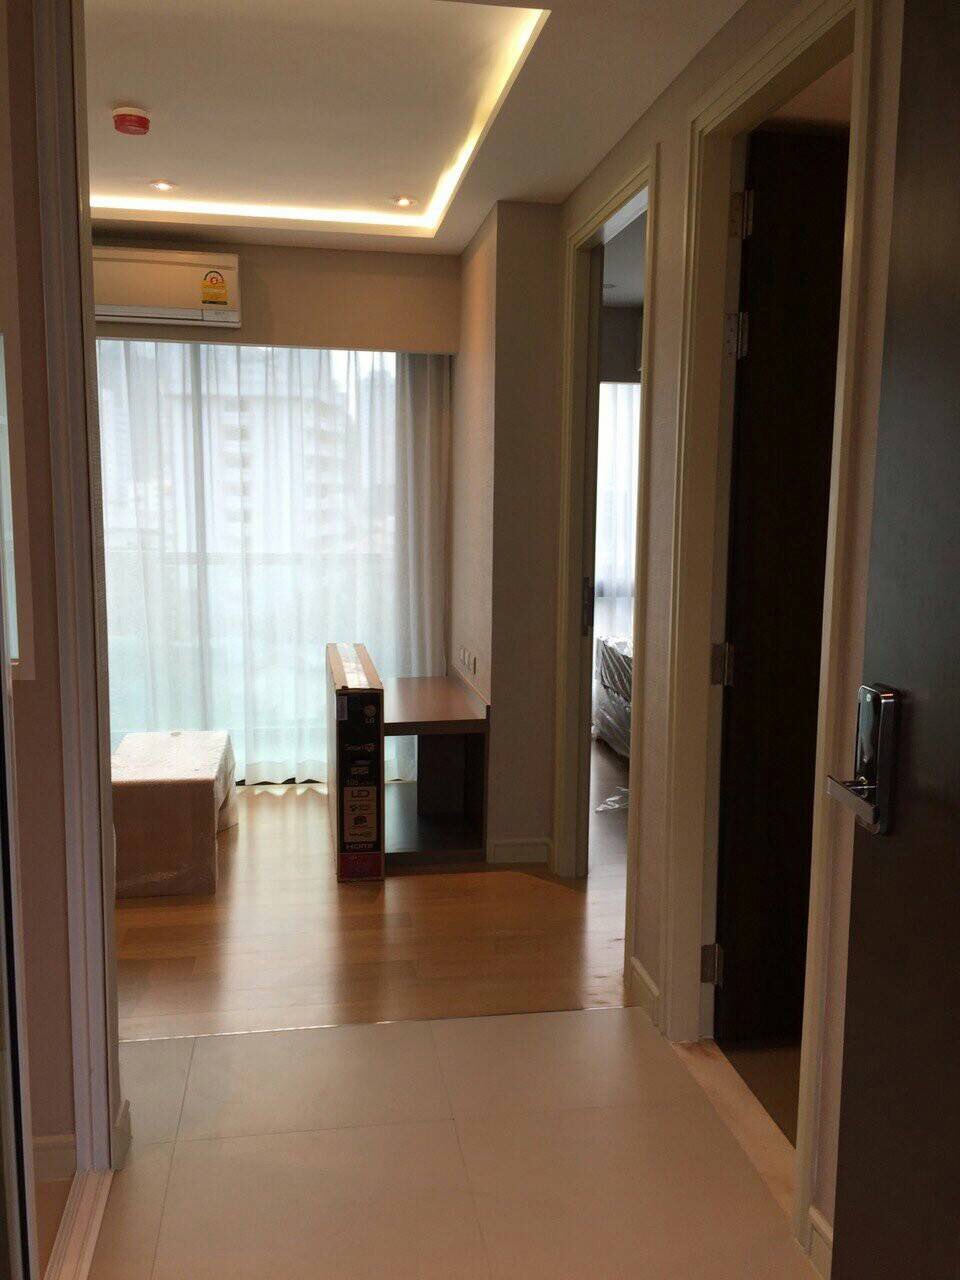 Tidy Deluxe Sukhumvit 34 condo for rent/sale in Bangkok 1 bedrooms, 38 sq.m. Near Thong lor BTS